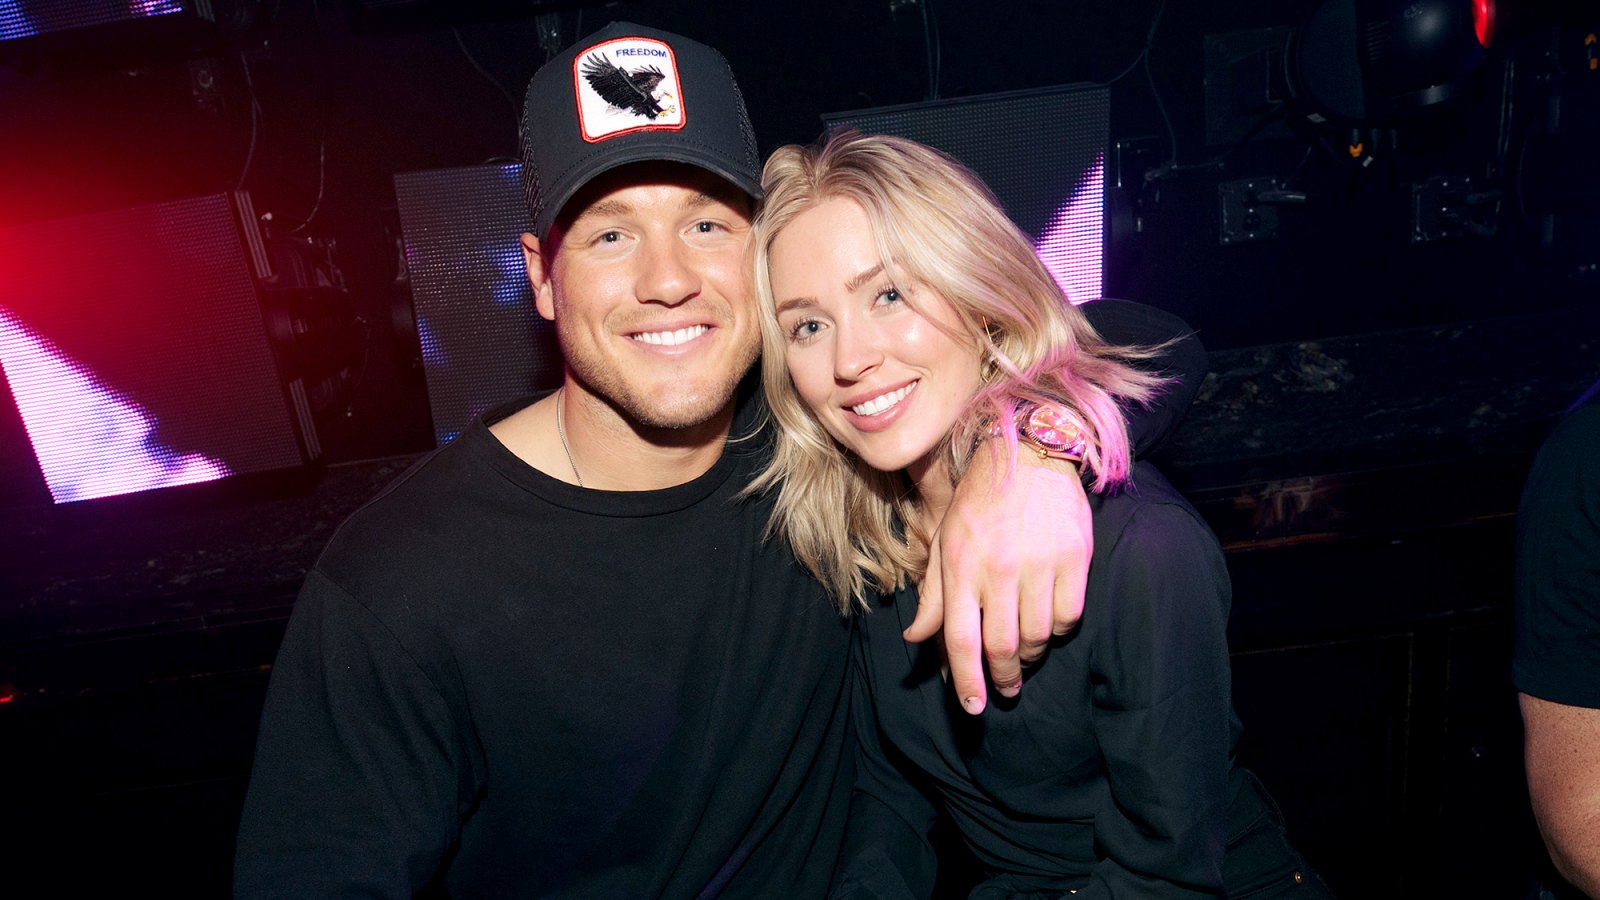 Colton-Underwood-and-Cassie-Randolph-Party-It-Up-in-Las-Vegas